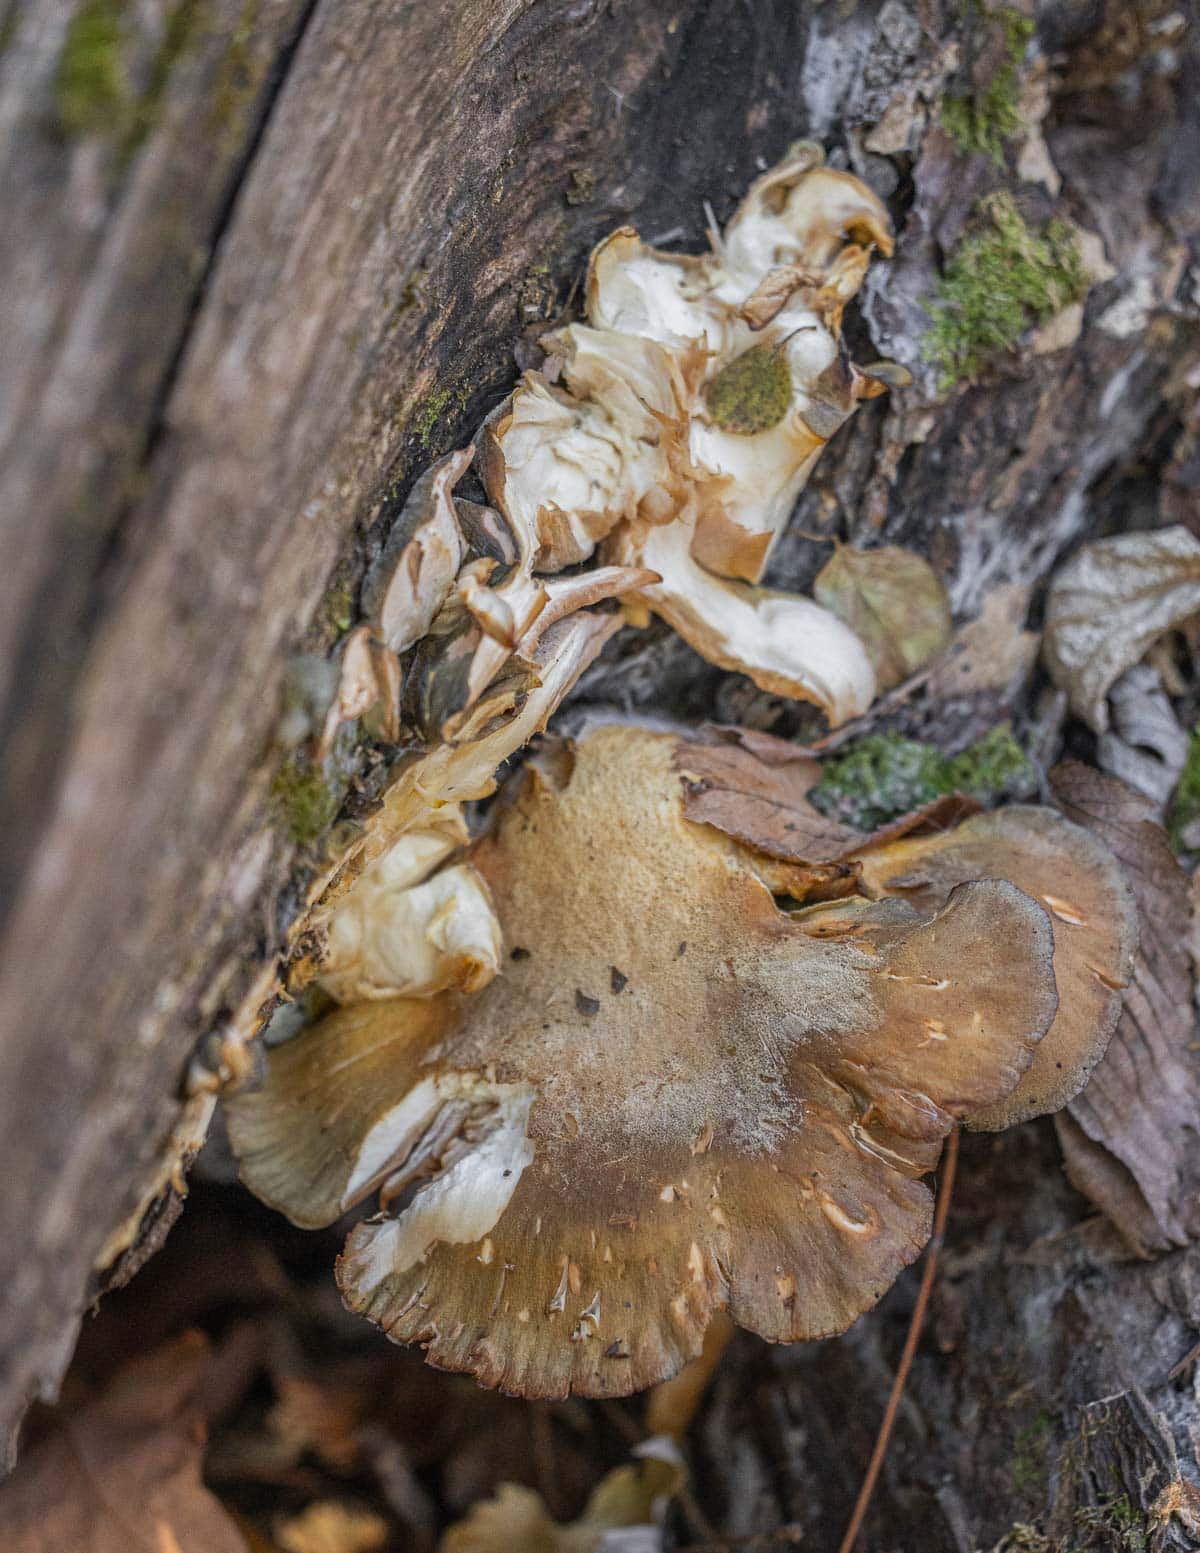 Mukitake or late fall oyster mushrooms (Sarcomyxa serotina) that have been eaten by squirrels growing on a tree. 